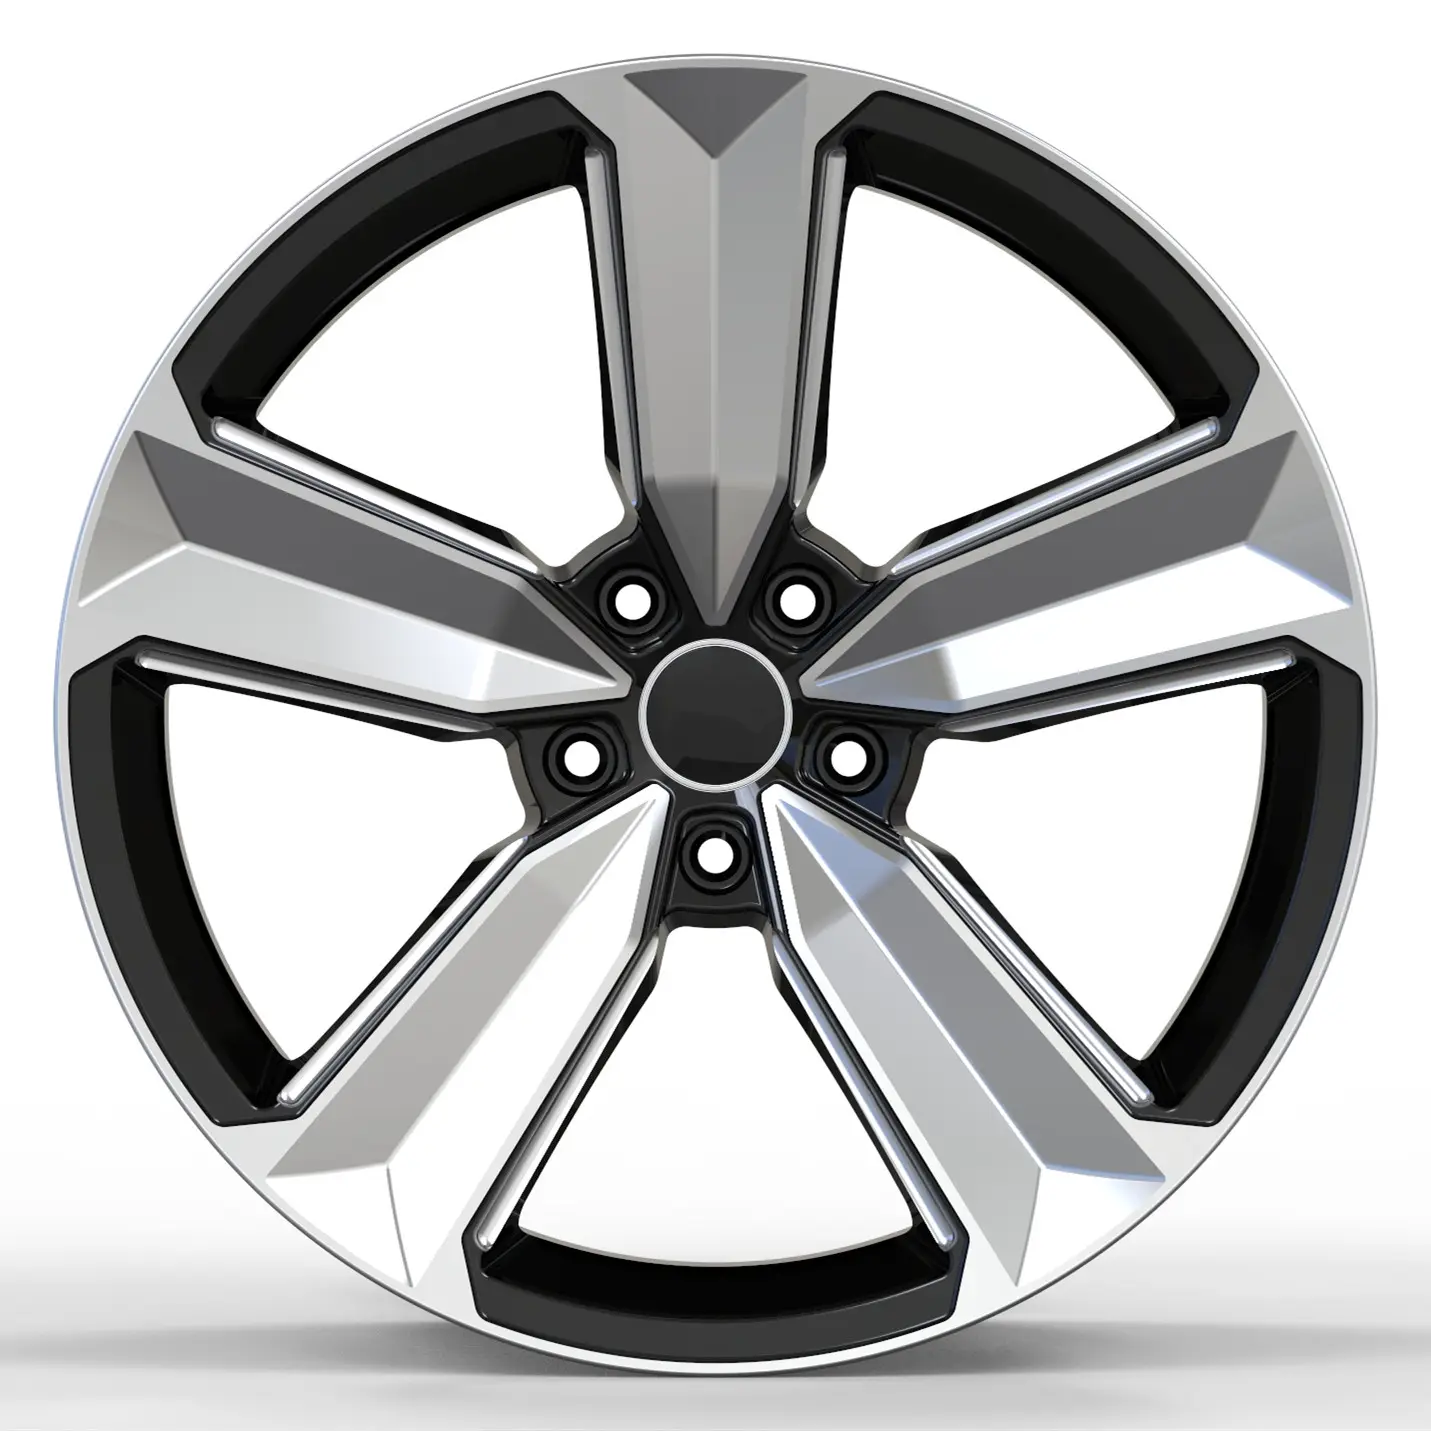 Passenger car wheels forged alloy rims 18 19 20 21 inch 5x112 gloss black polished face in stock for audi